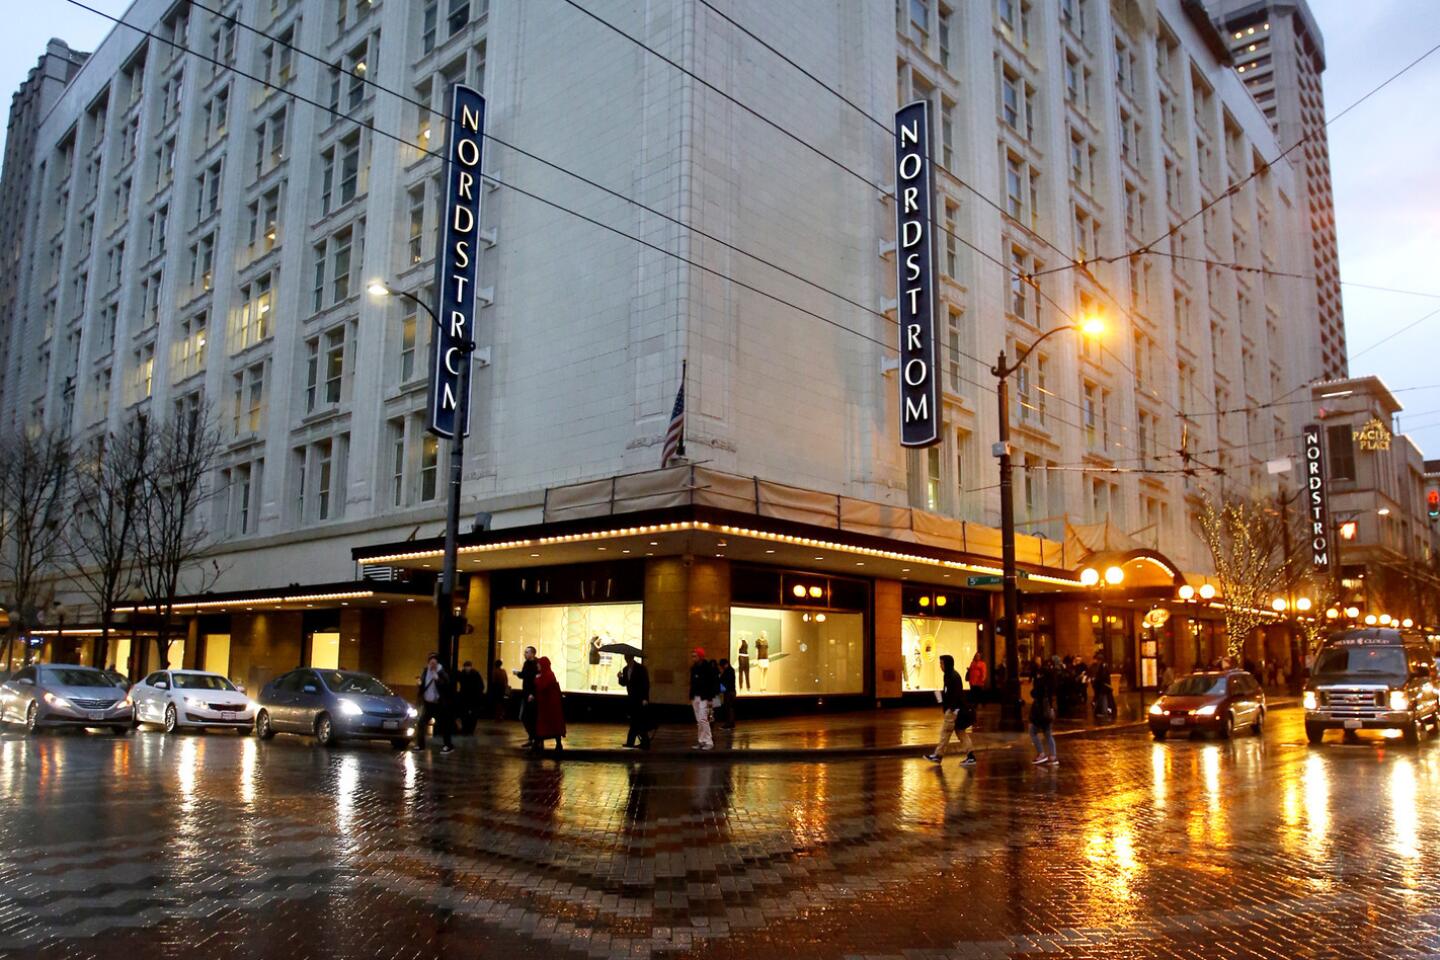 Have memories of Nordstrom flagship store in Seattle? Share your story